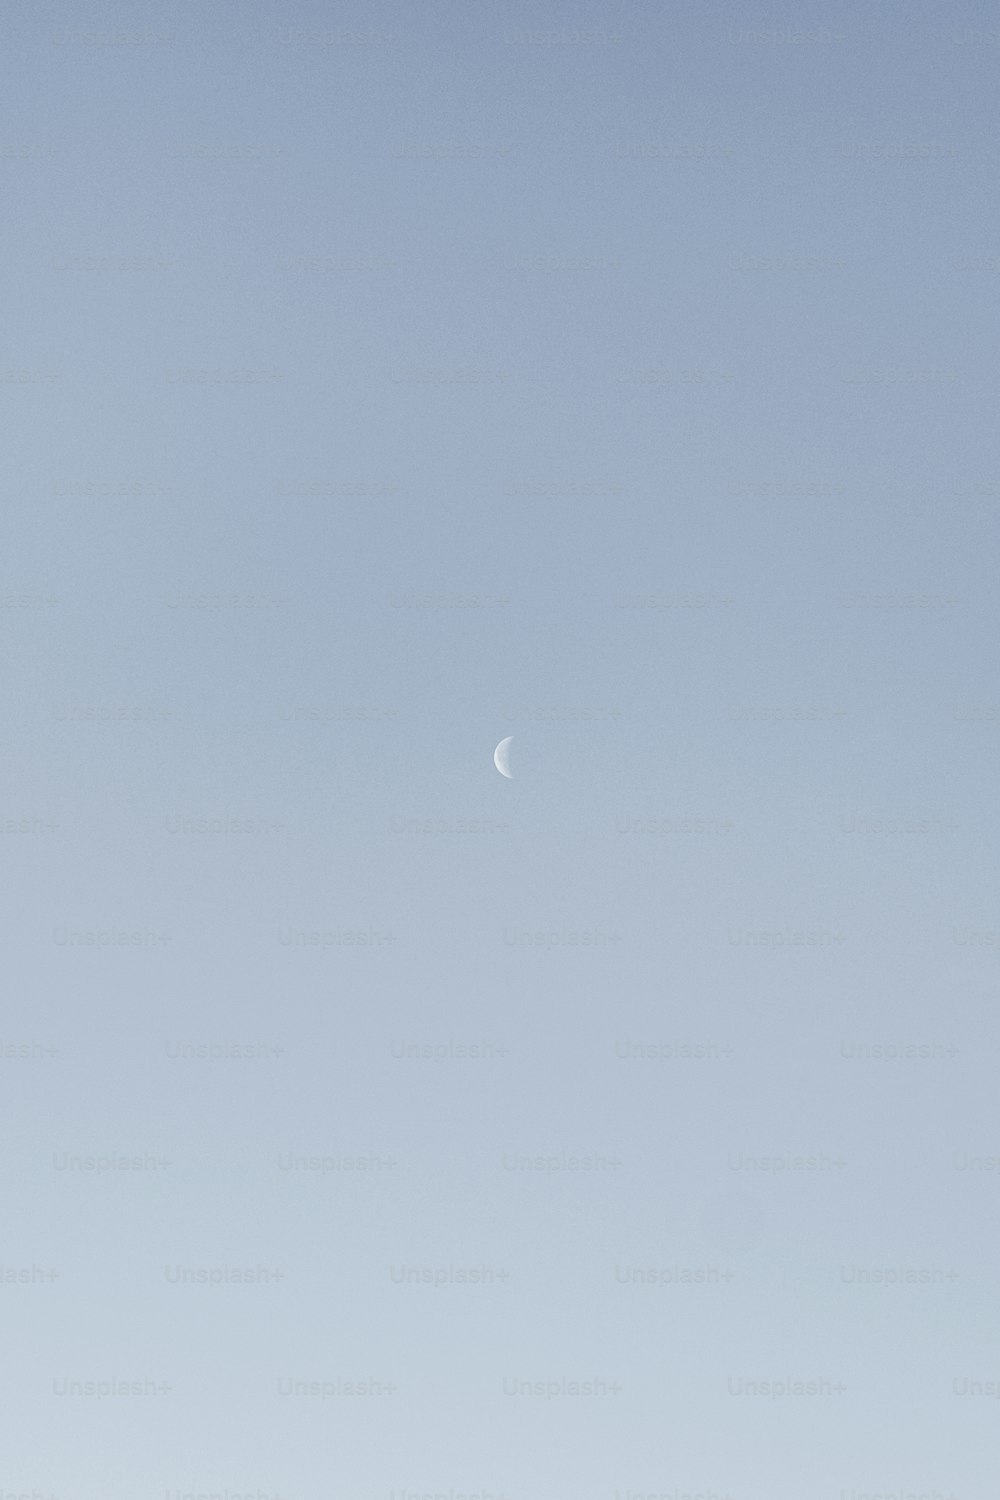 a plane flying in the sky with a half moon in the distance